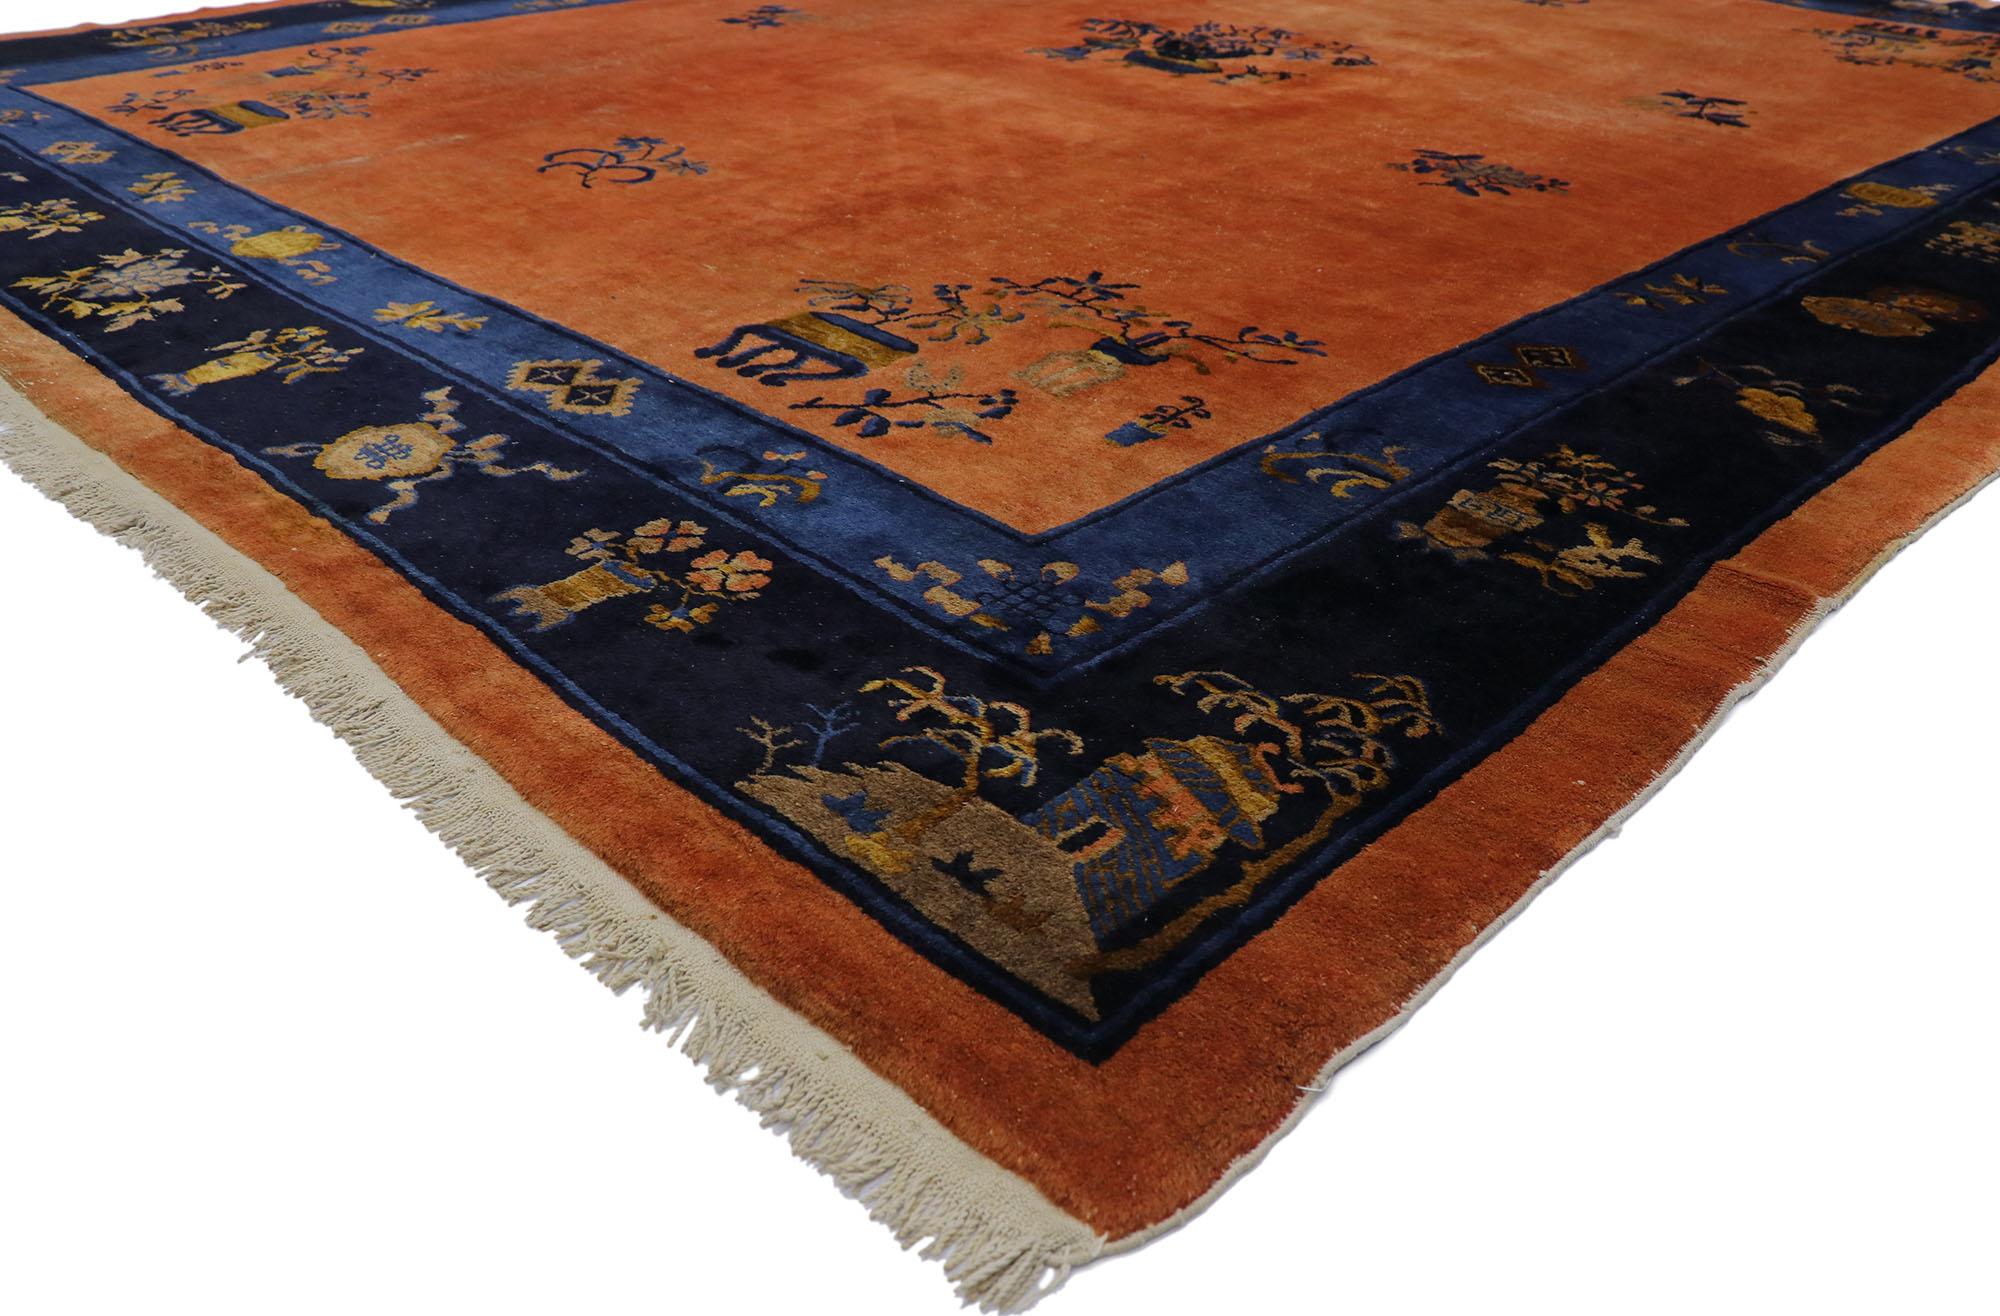 78129 Distressed Antique Chinese Peking rug with Art Deco Style 10'01 x 13'03. With its effortless beauty and rustic sensibility, this hand-knotted wool distressed antique Chinese Peking rug will take on a curated lived-in look that feels timeless